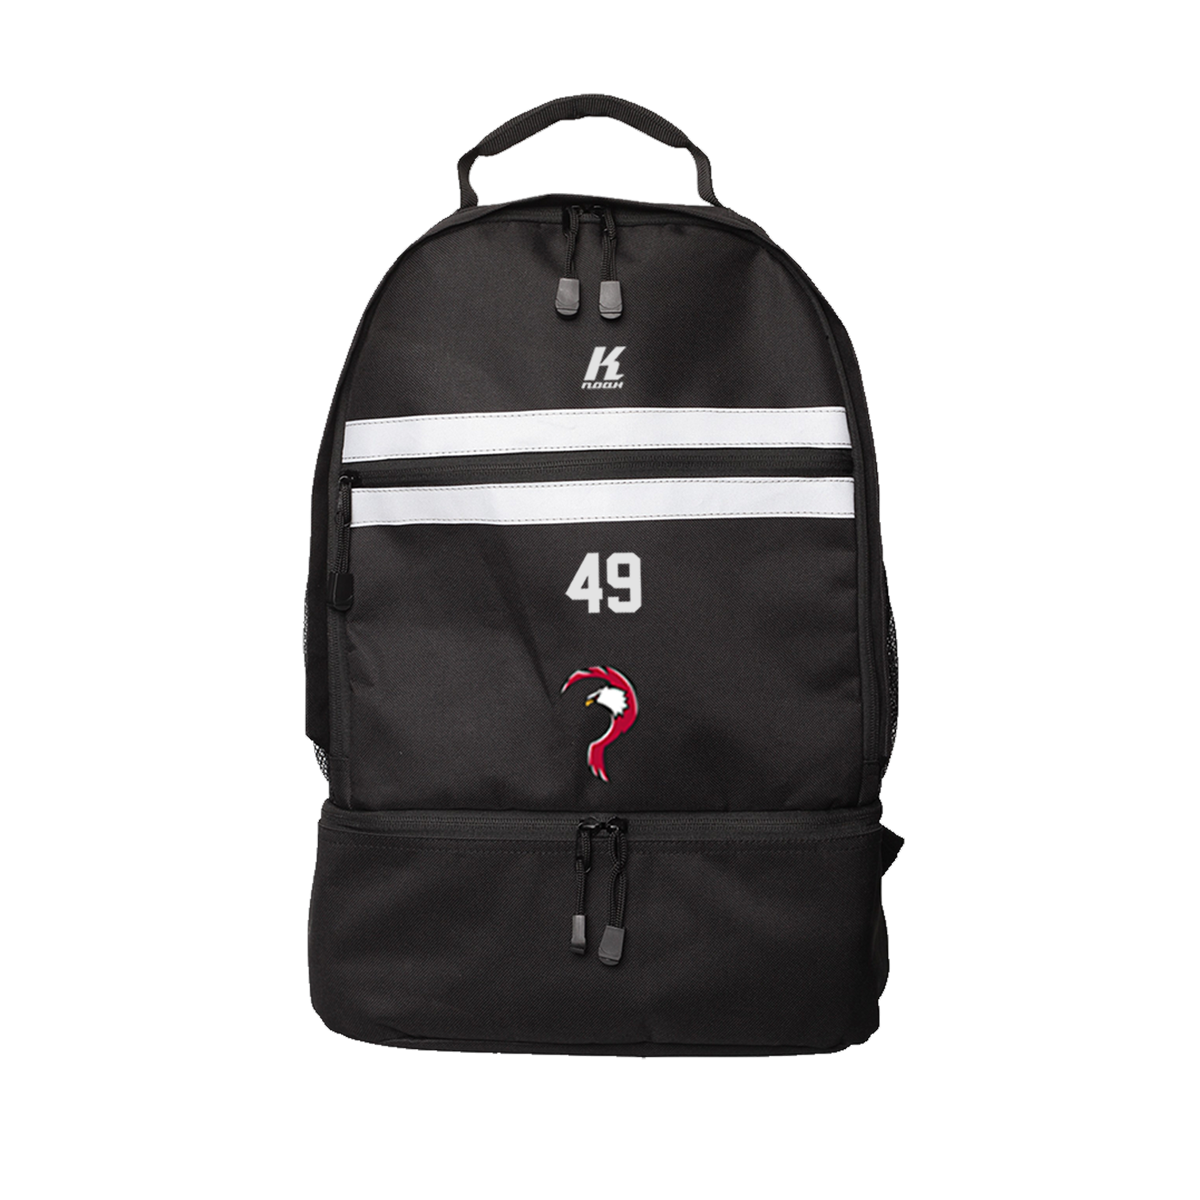 Patriots Players Backpack with Playernumber or Initials